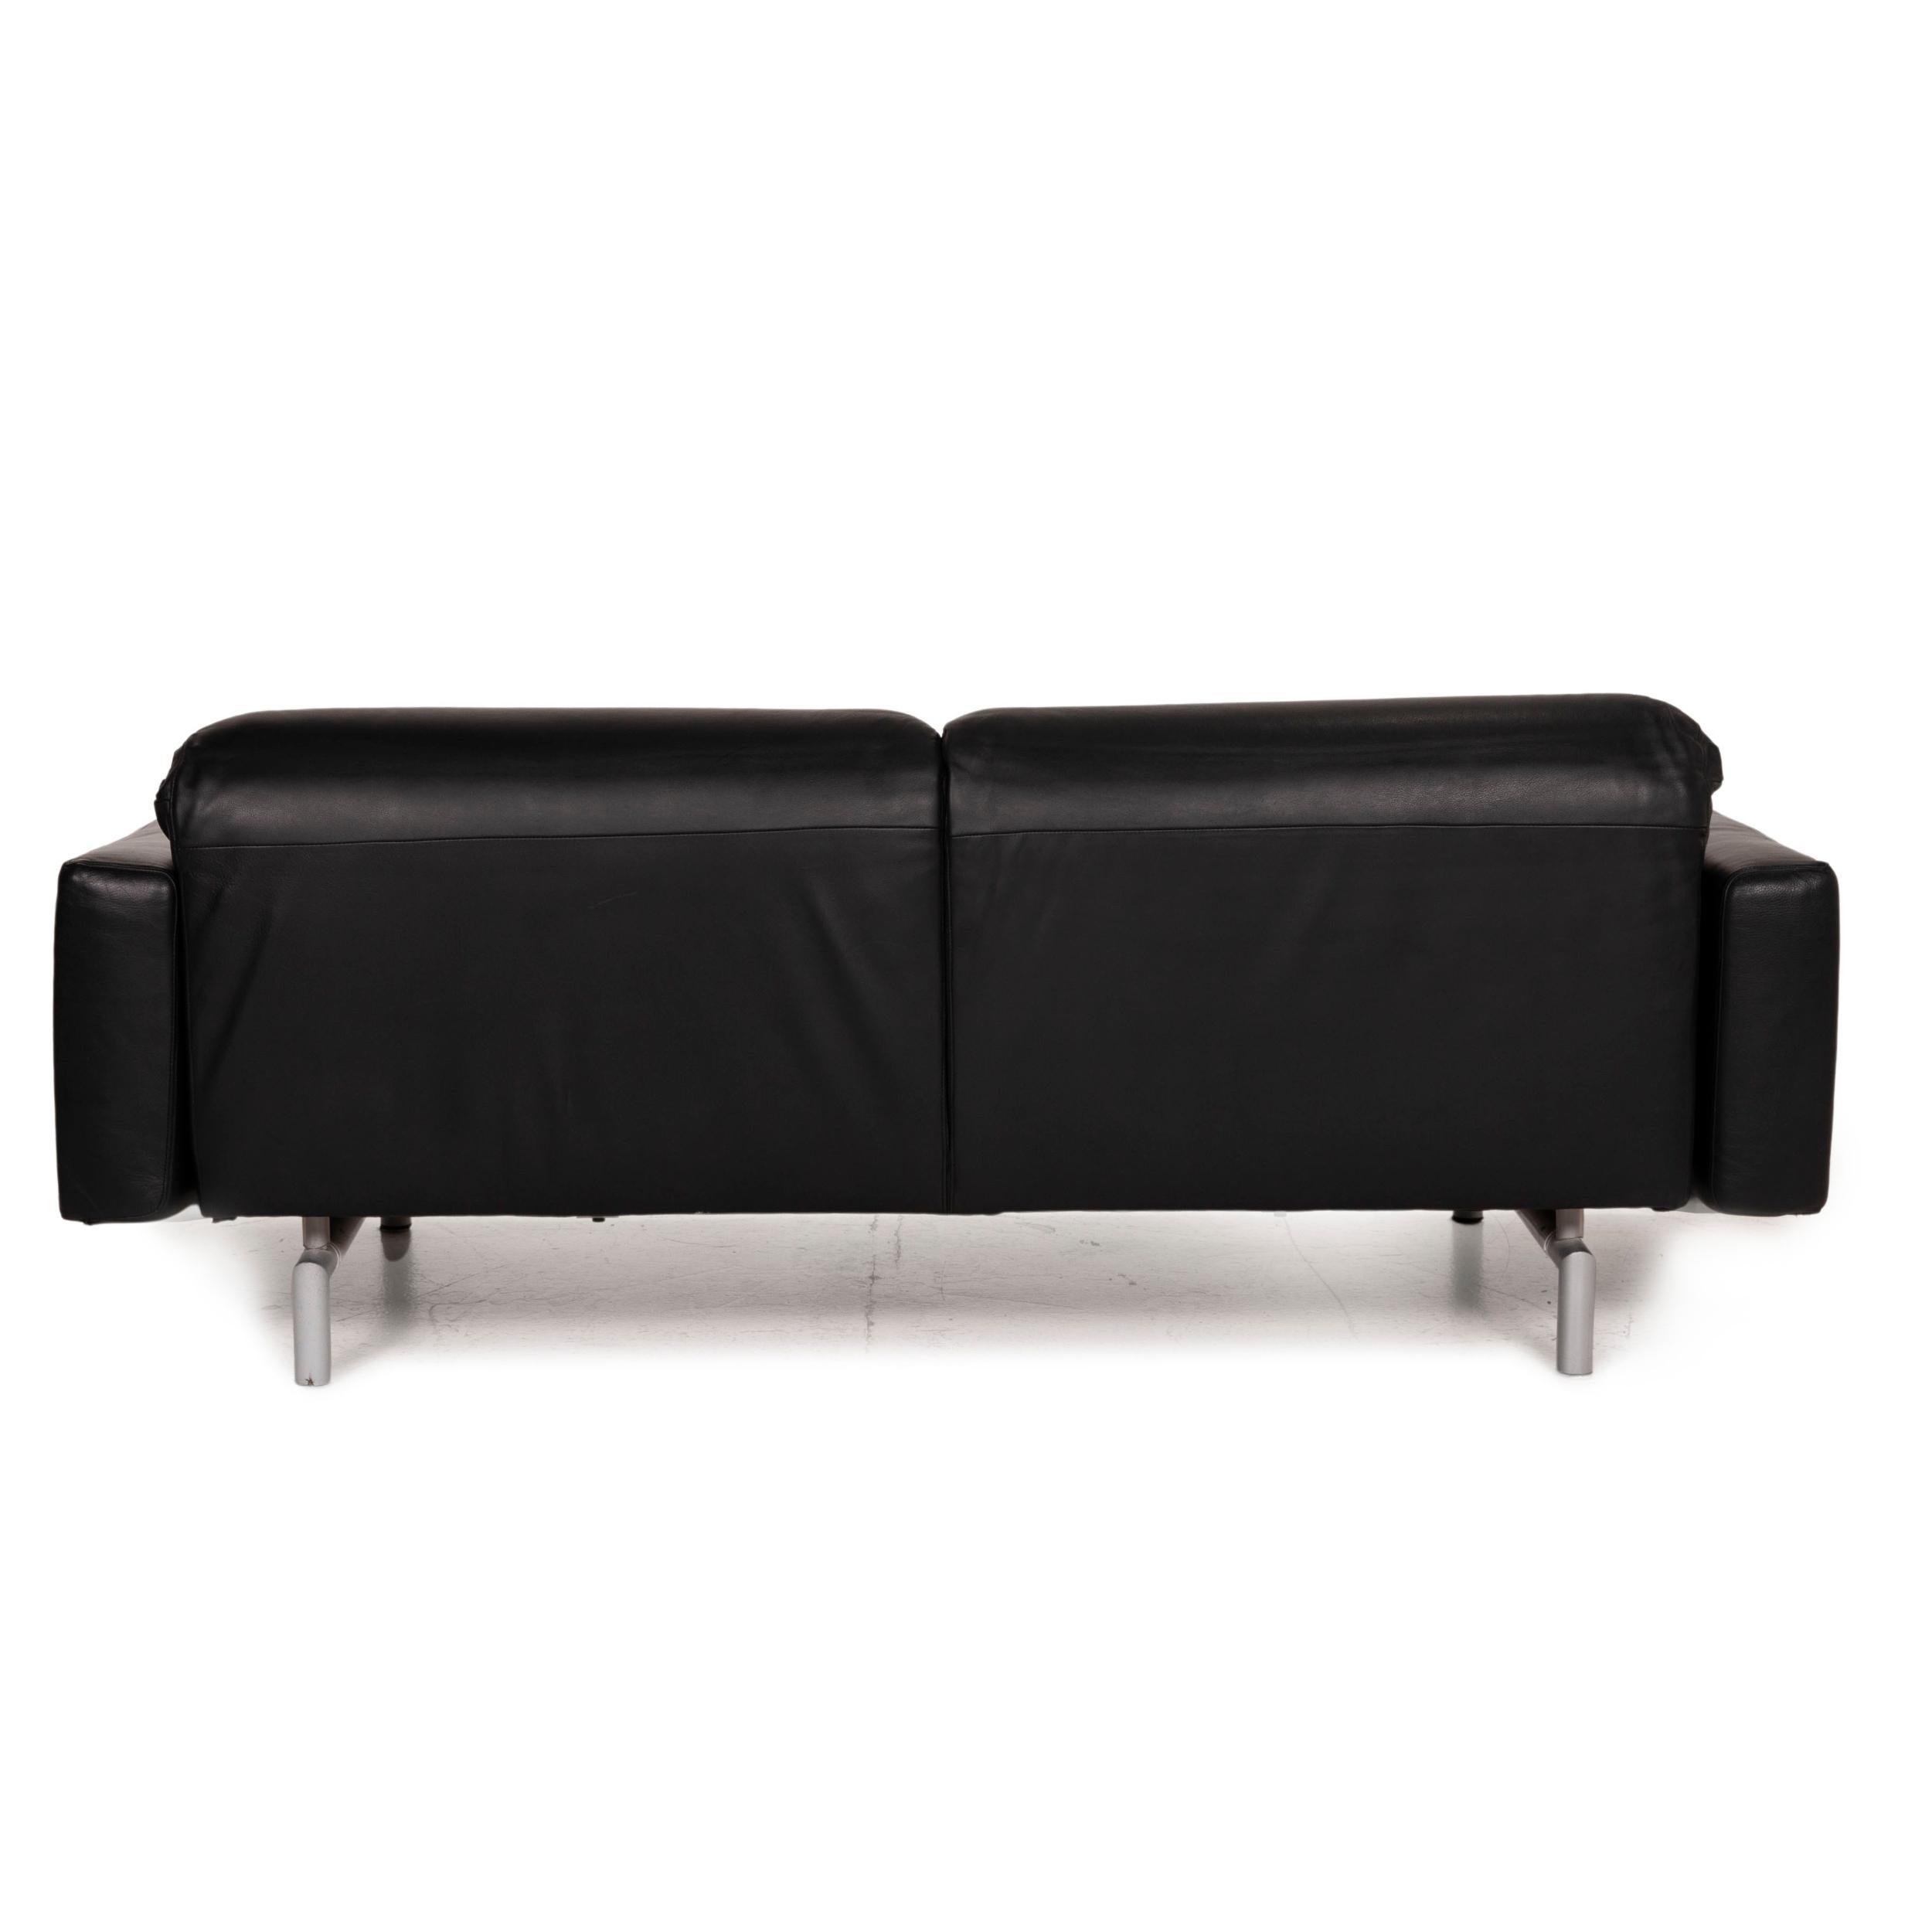 Strässle Matteo Leather Sofa Black Two-Seater Function Relax Function Couch 4